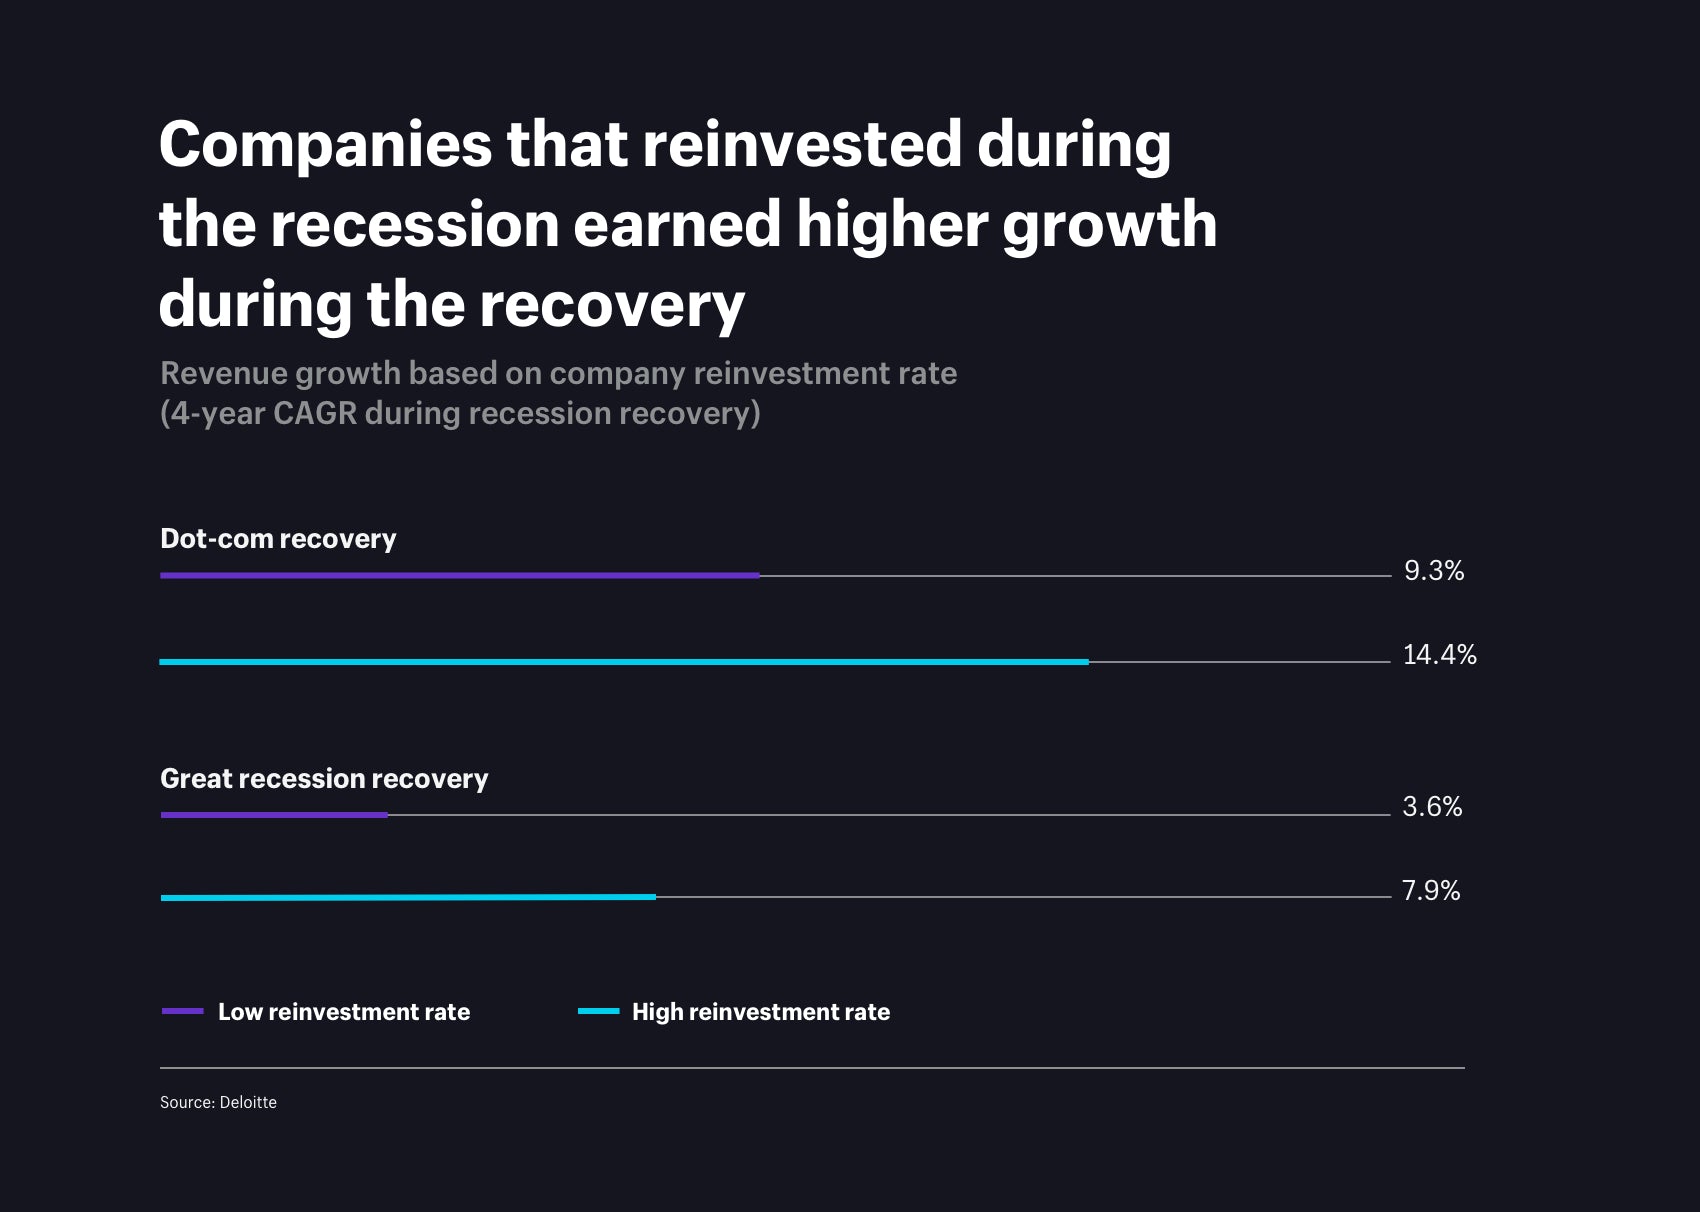 Companies that reinvested during the recession earned high growth during the recovery